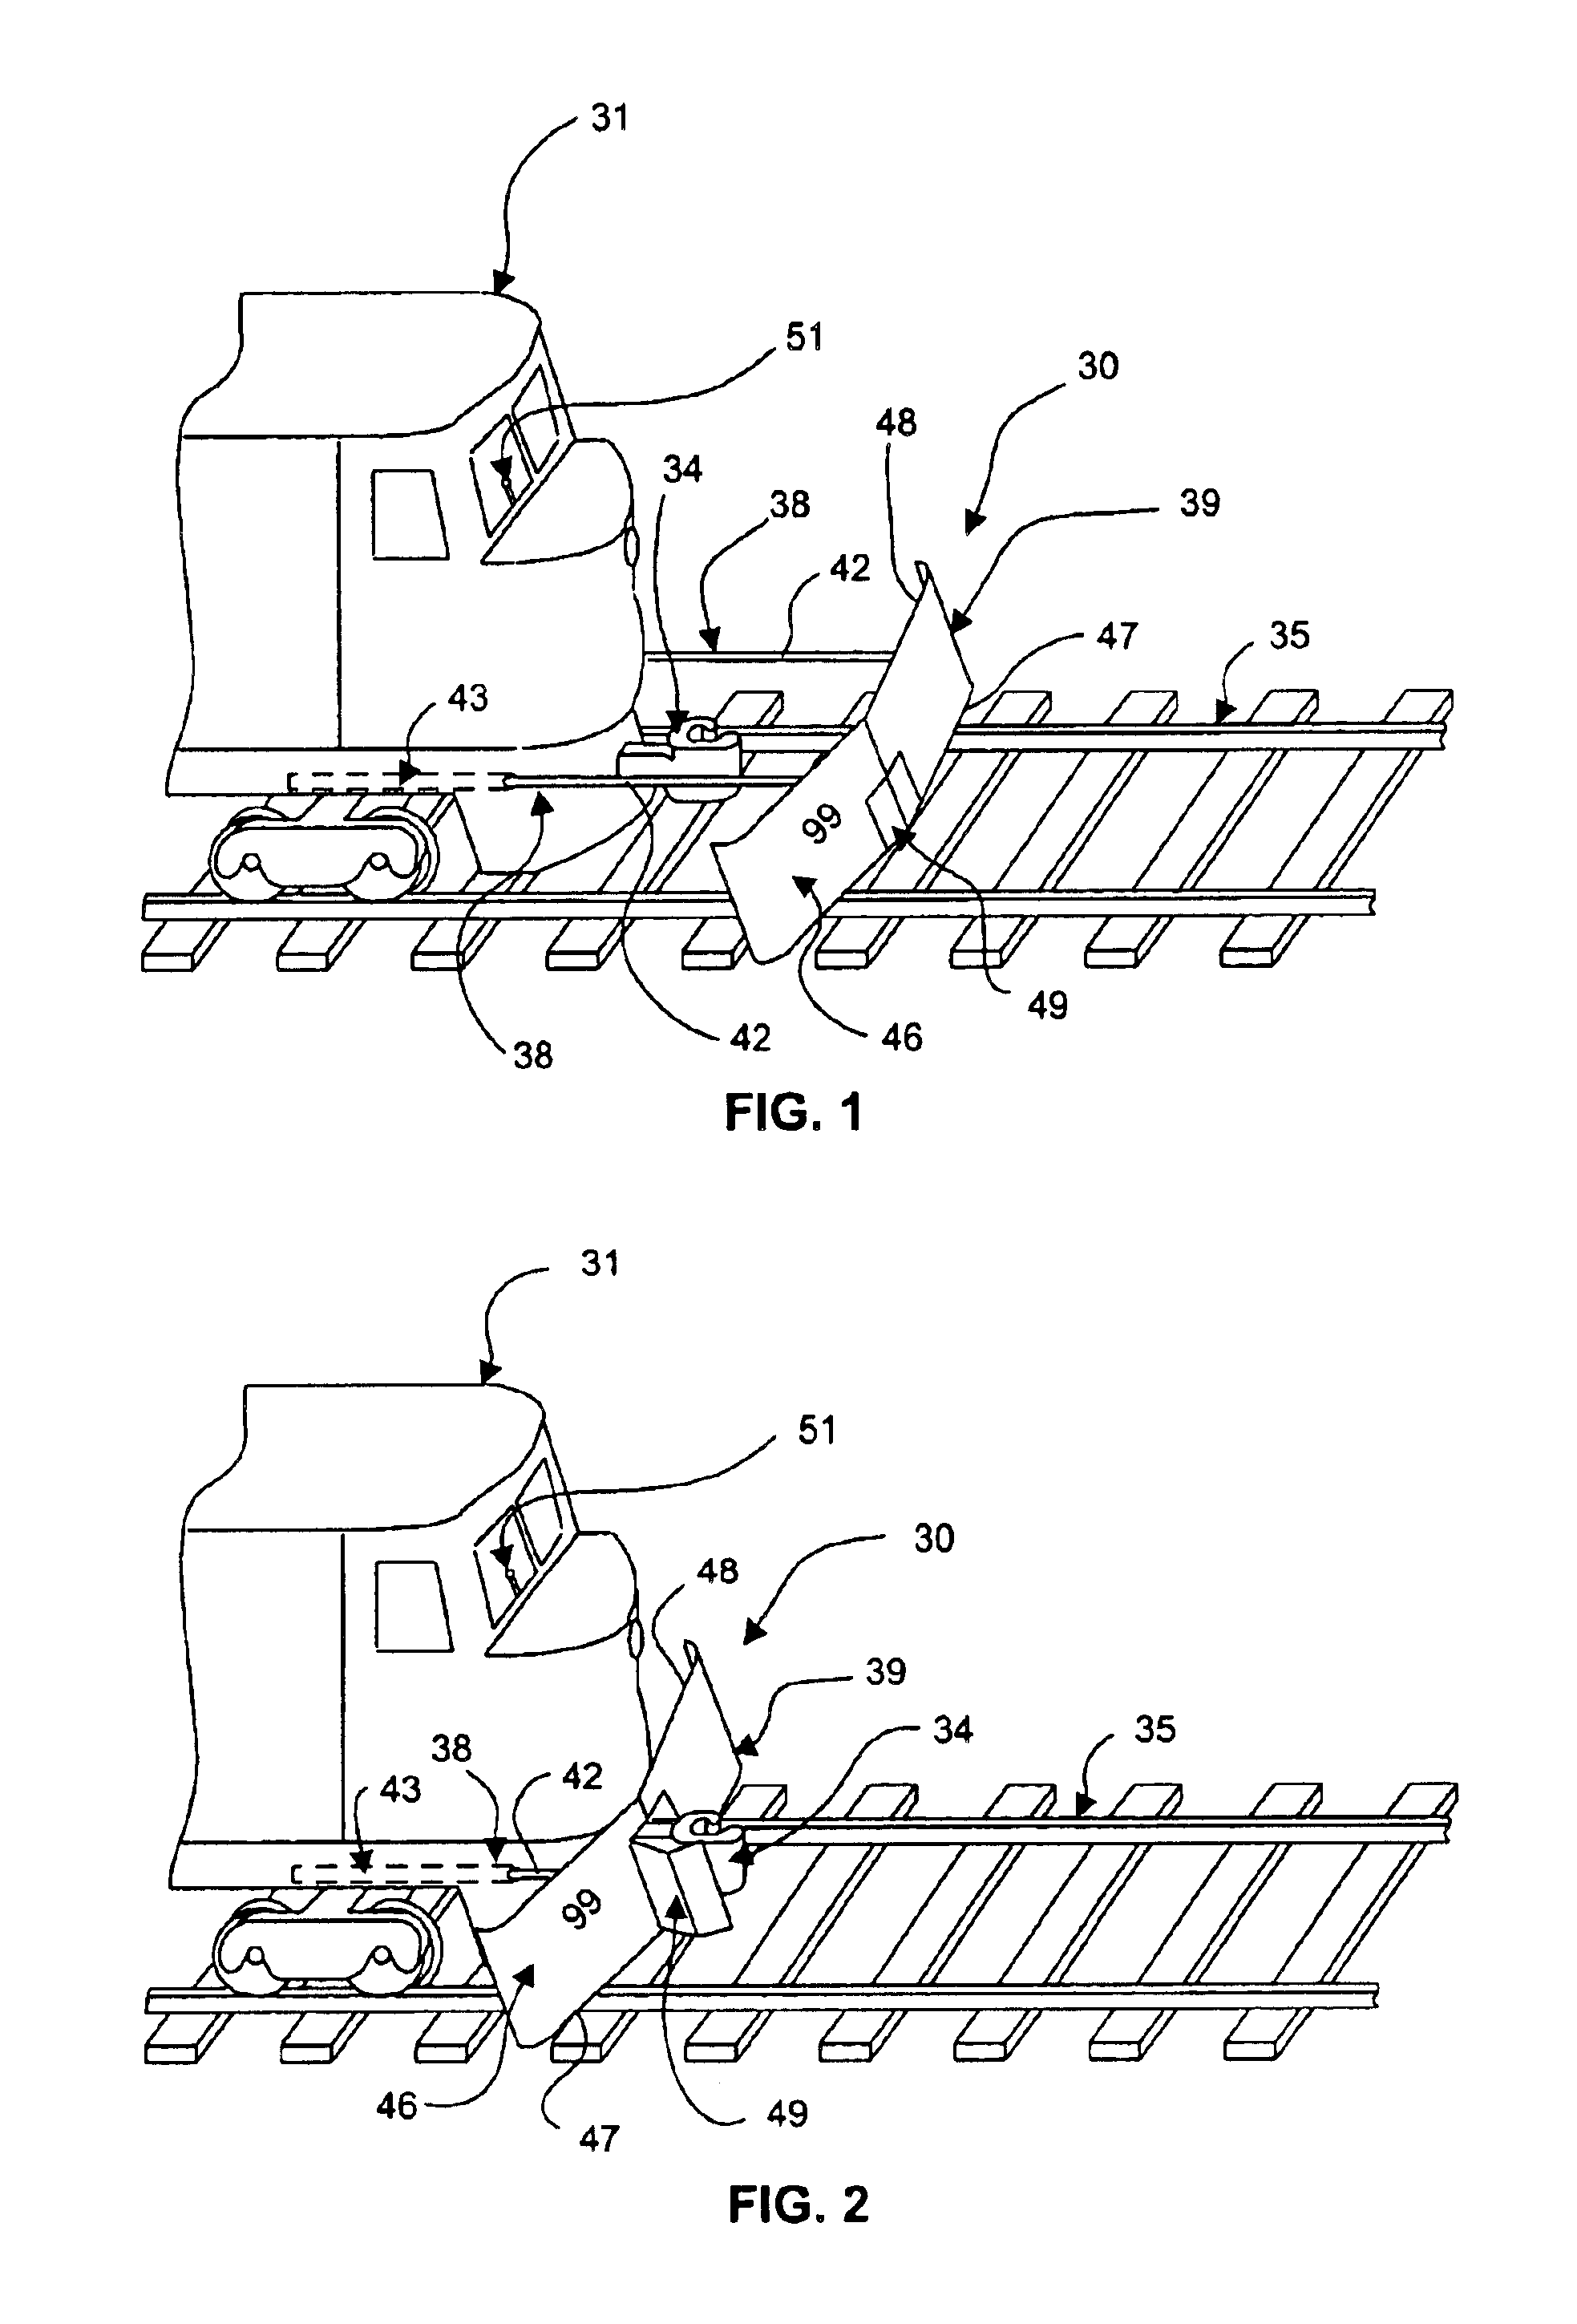 Collision attenuating system